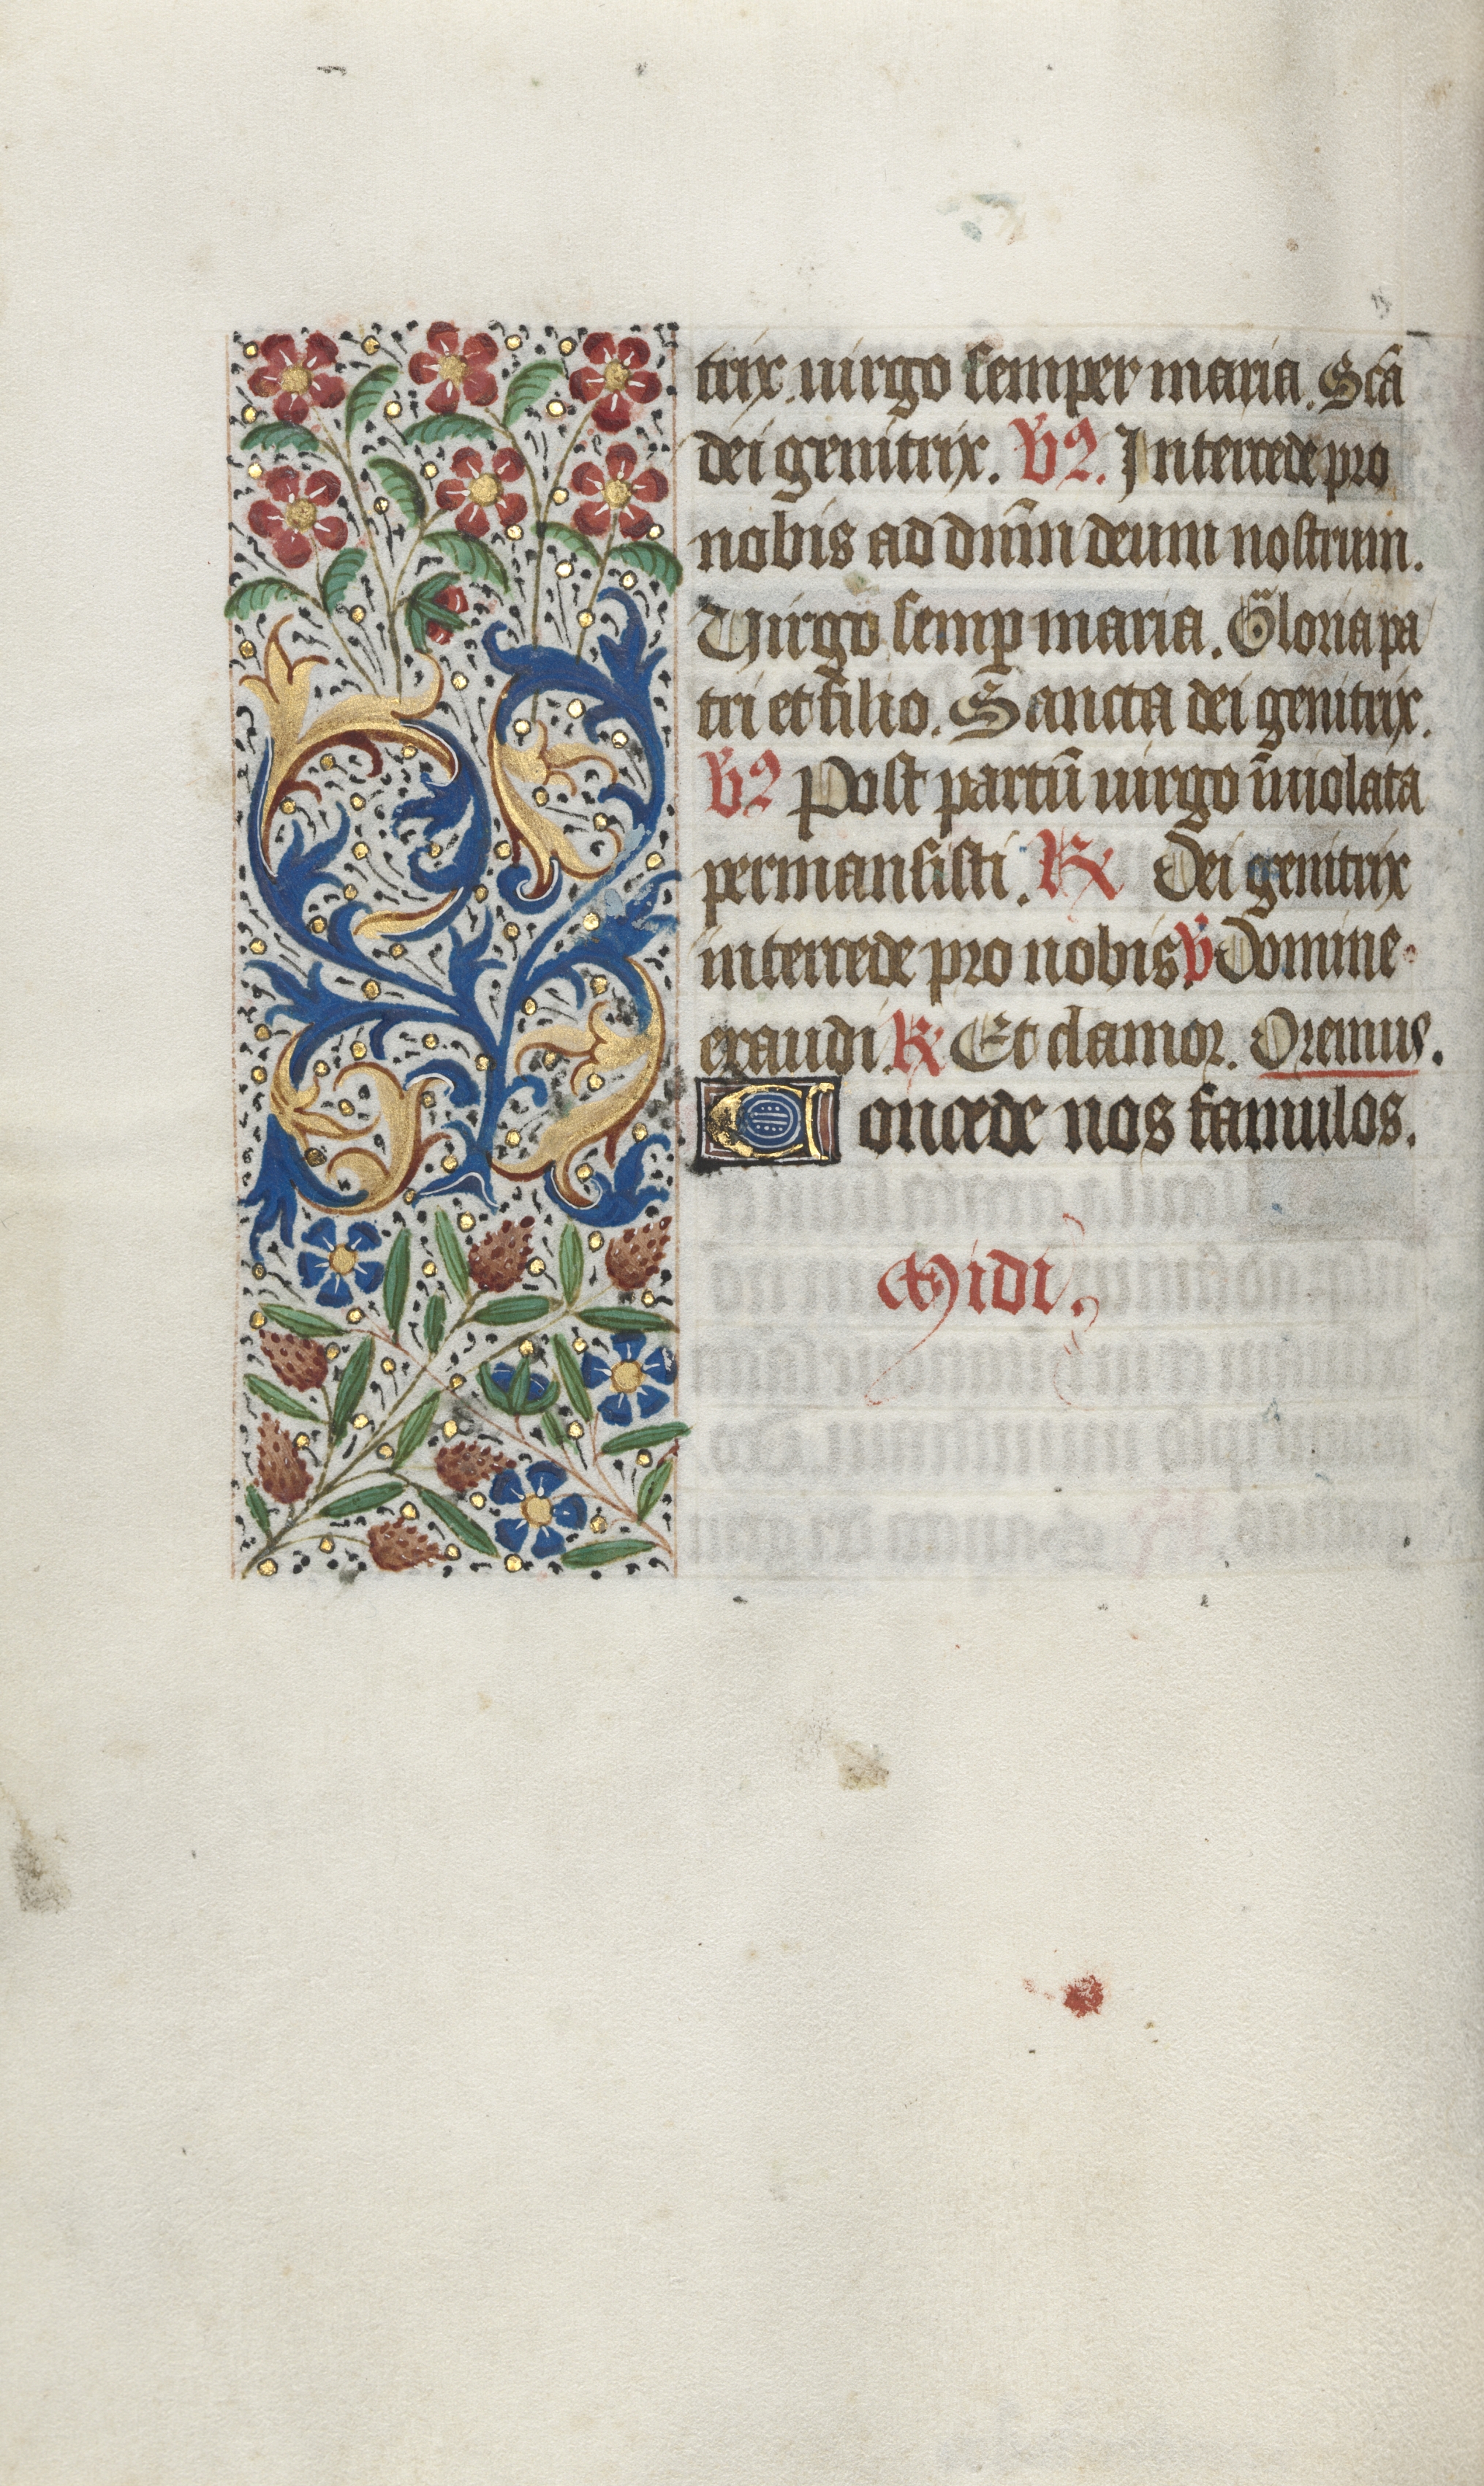 Book of Hours (Use of Rouen): fol. 63v